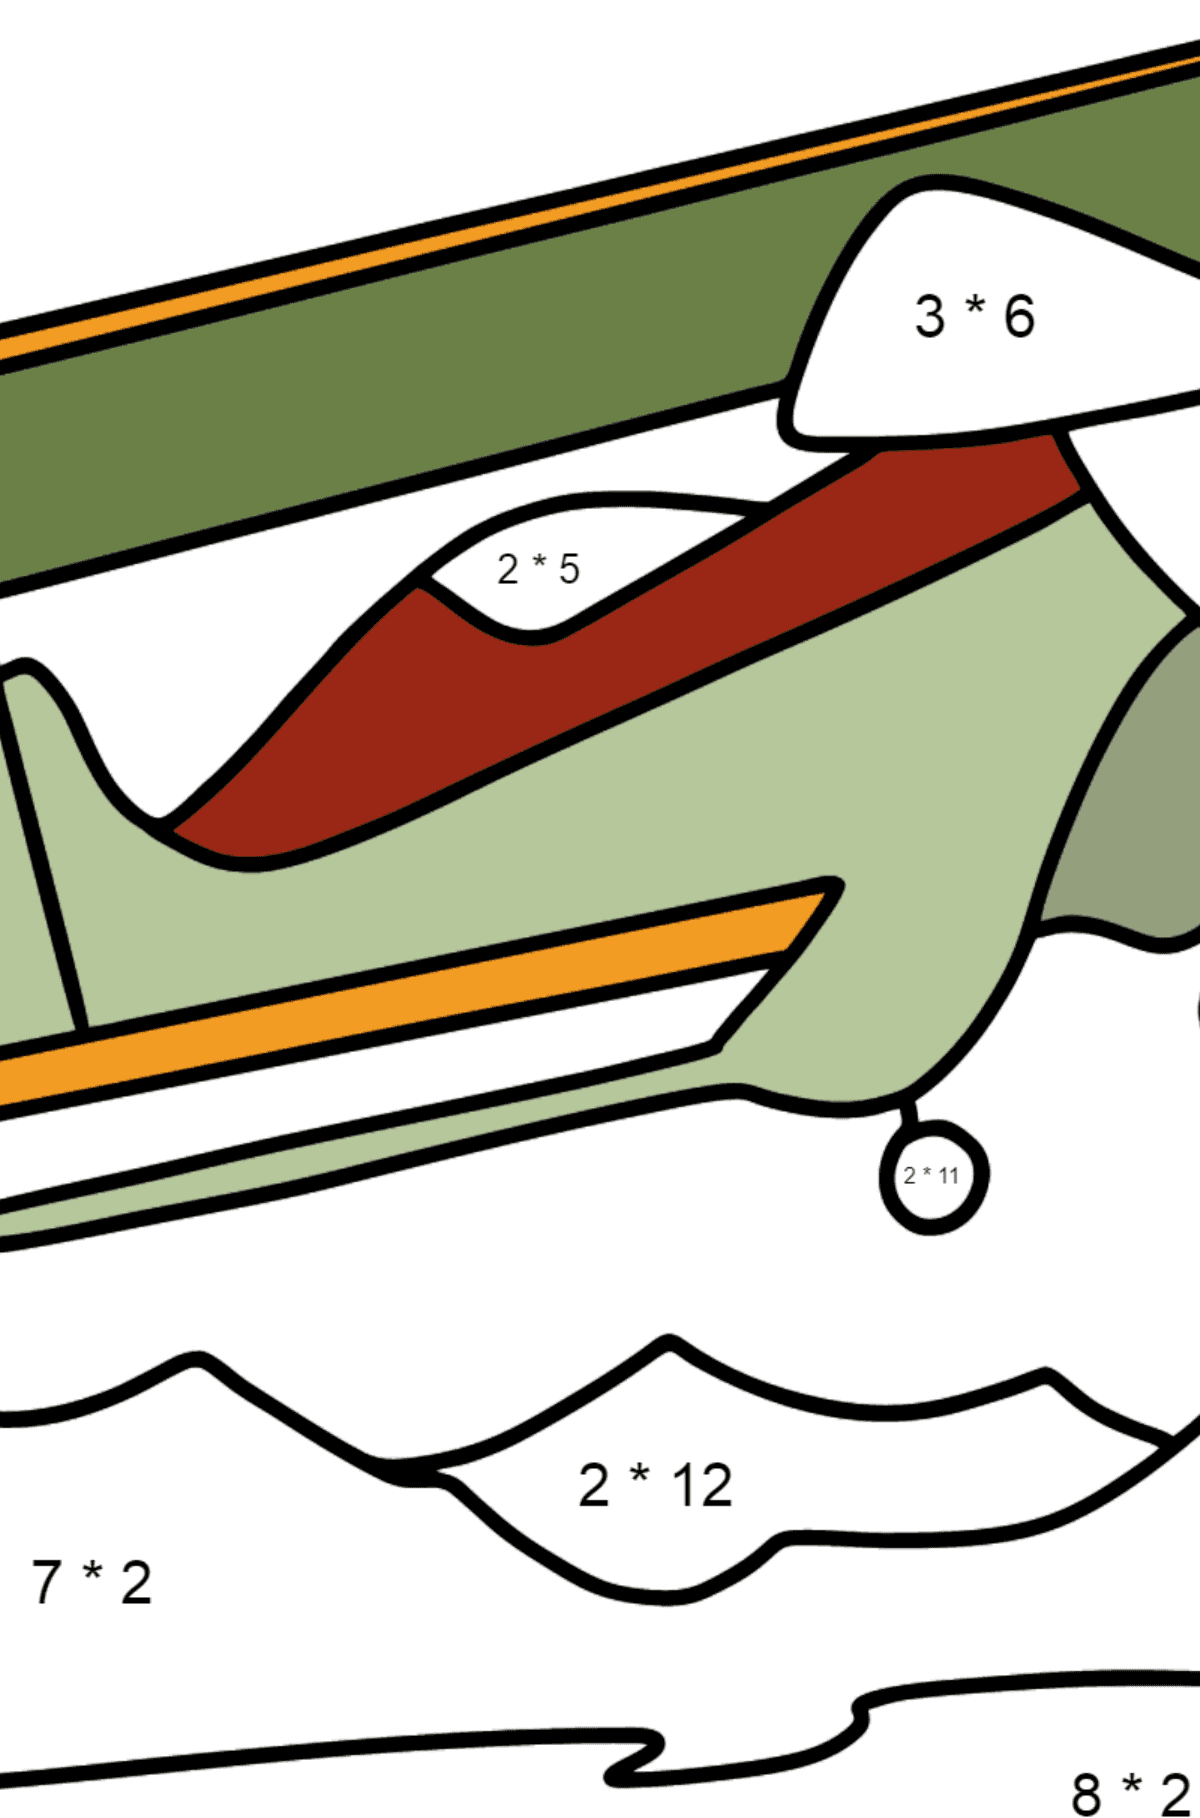 Coloring page - Light Airplane flies Over Mountains - Math Coloring - Multiplication for Kids